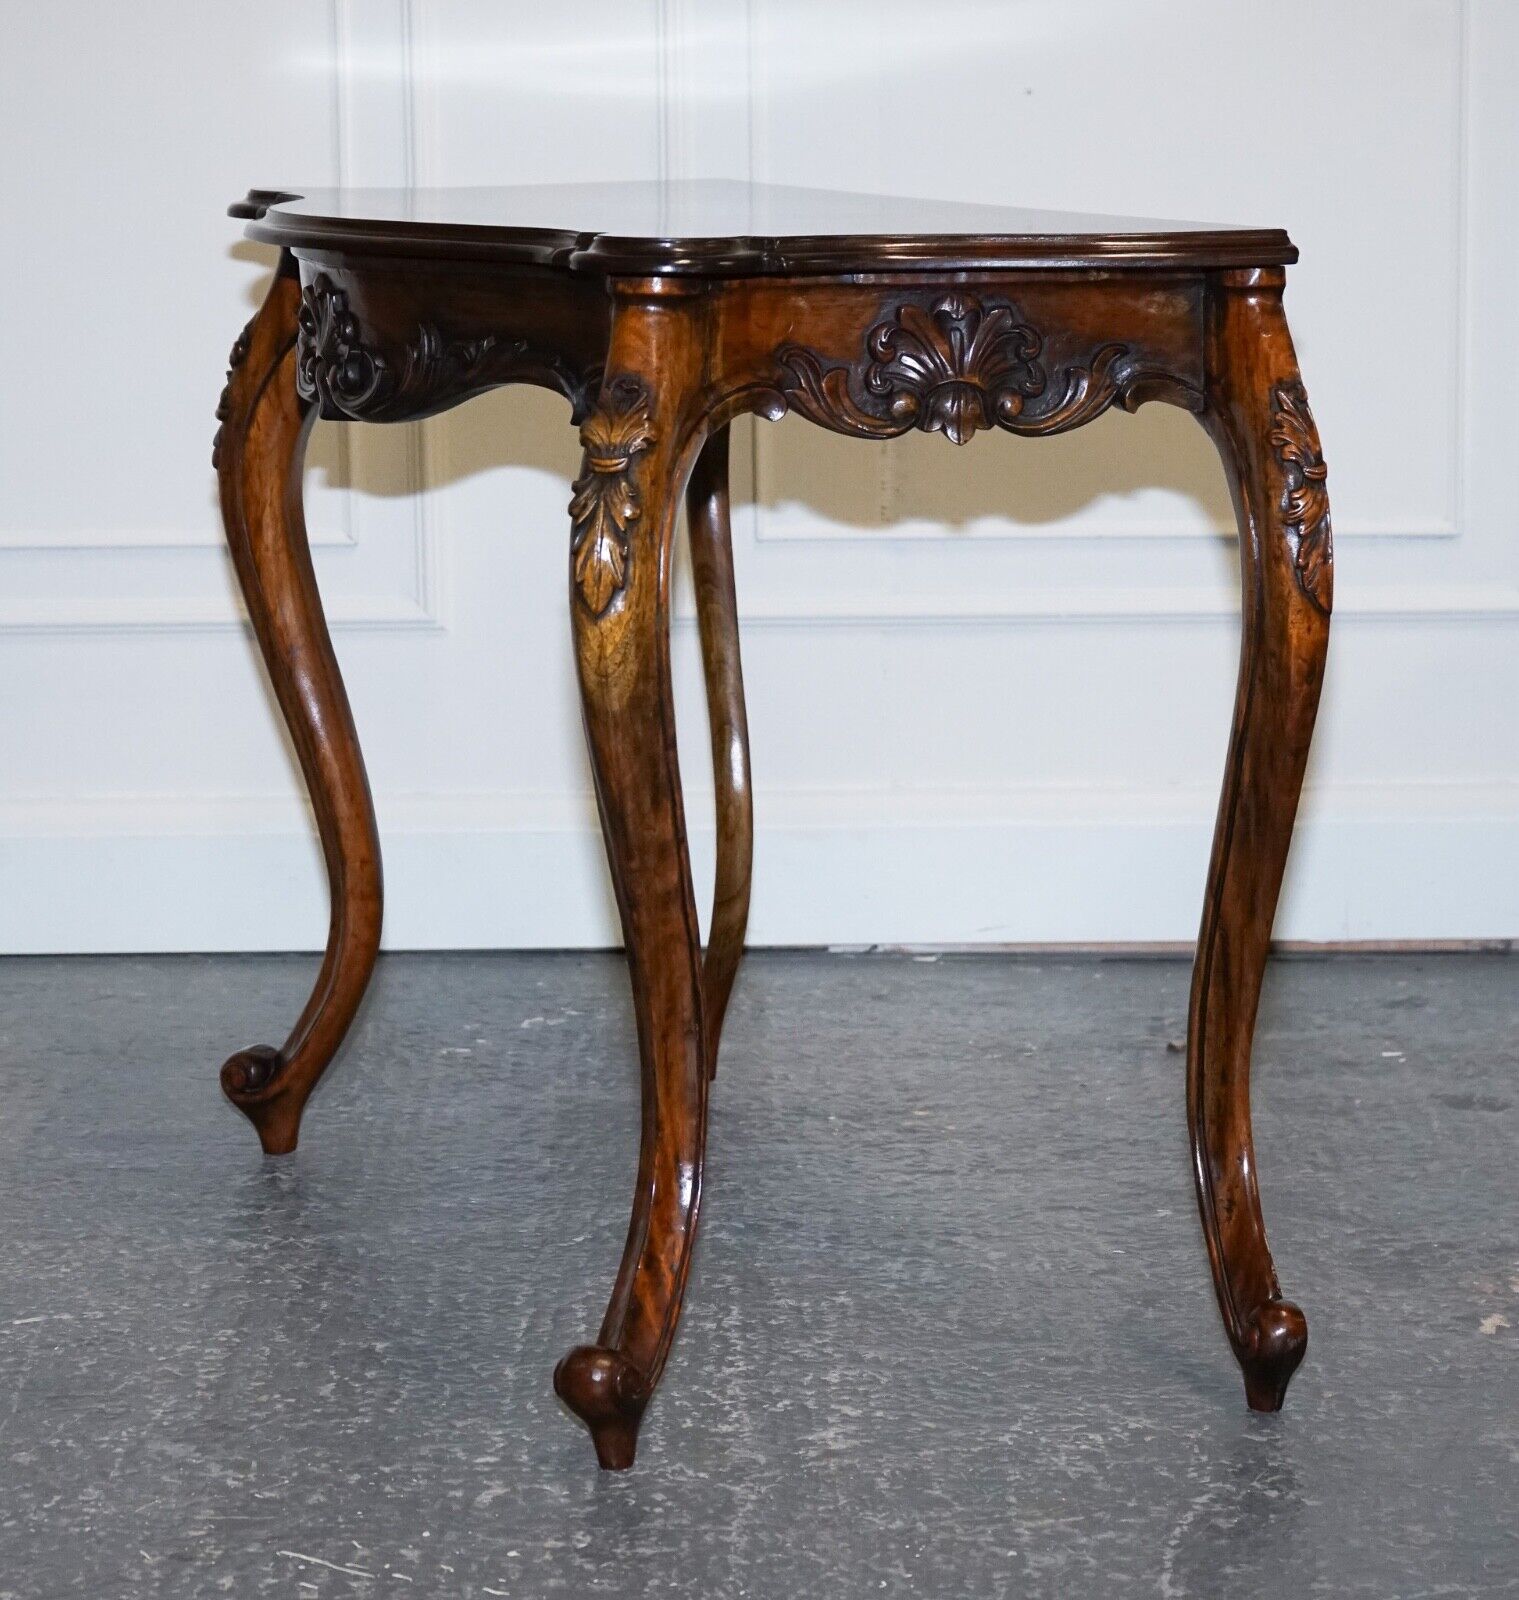 LATE 19TH CENTURY CARVED FRENCH HALL STAND CONSOLE TABLE WITH CABRIOLE LEGS